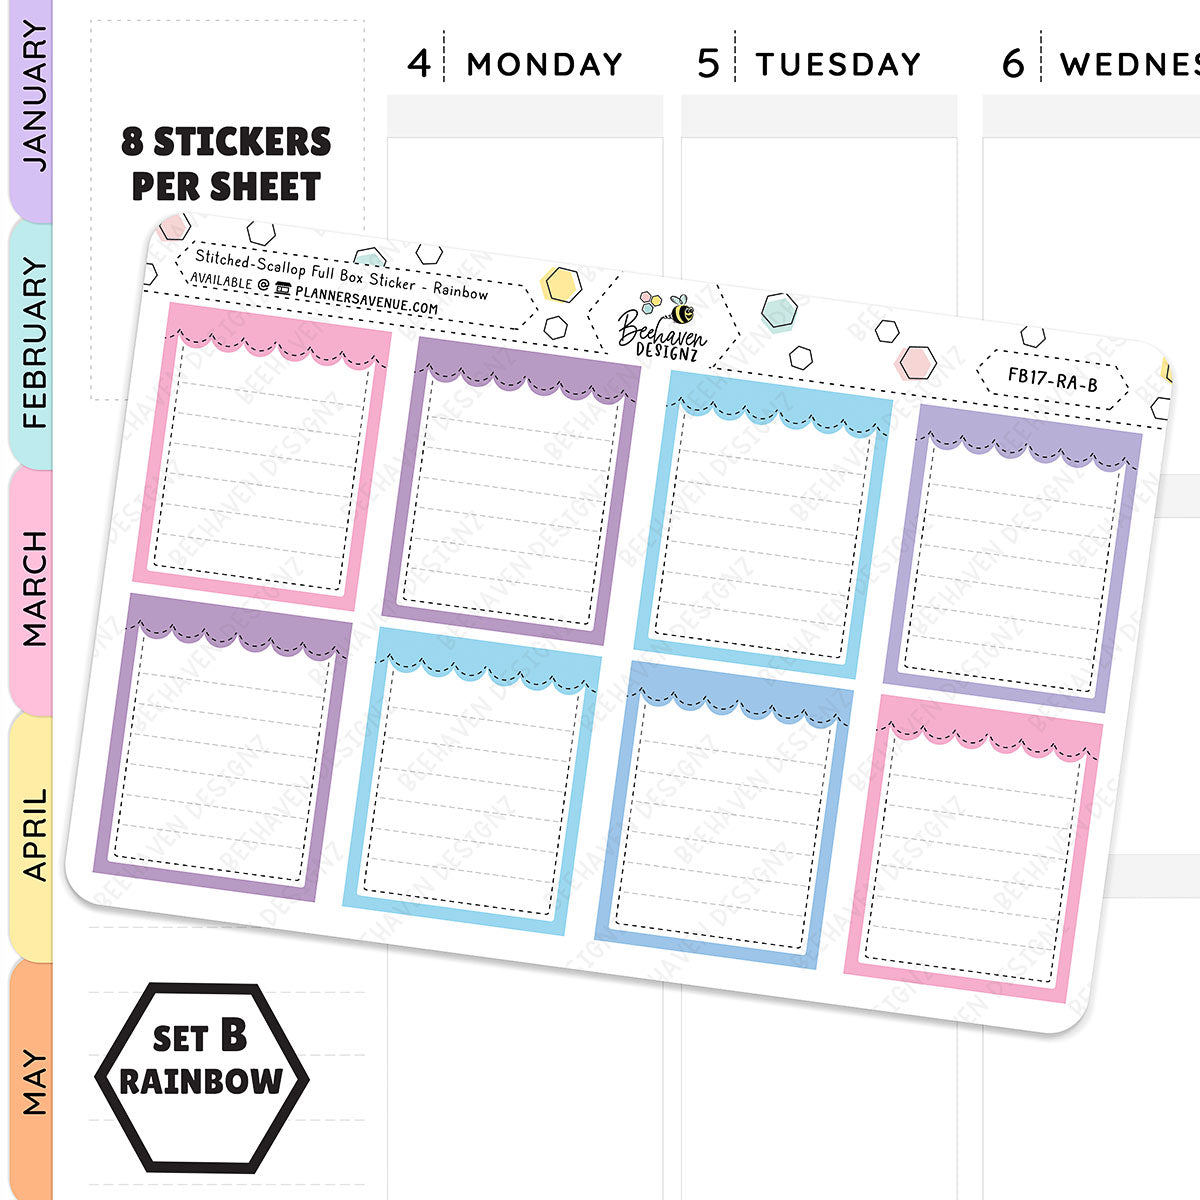 Stitched Scallop Full Box Planner Stickers